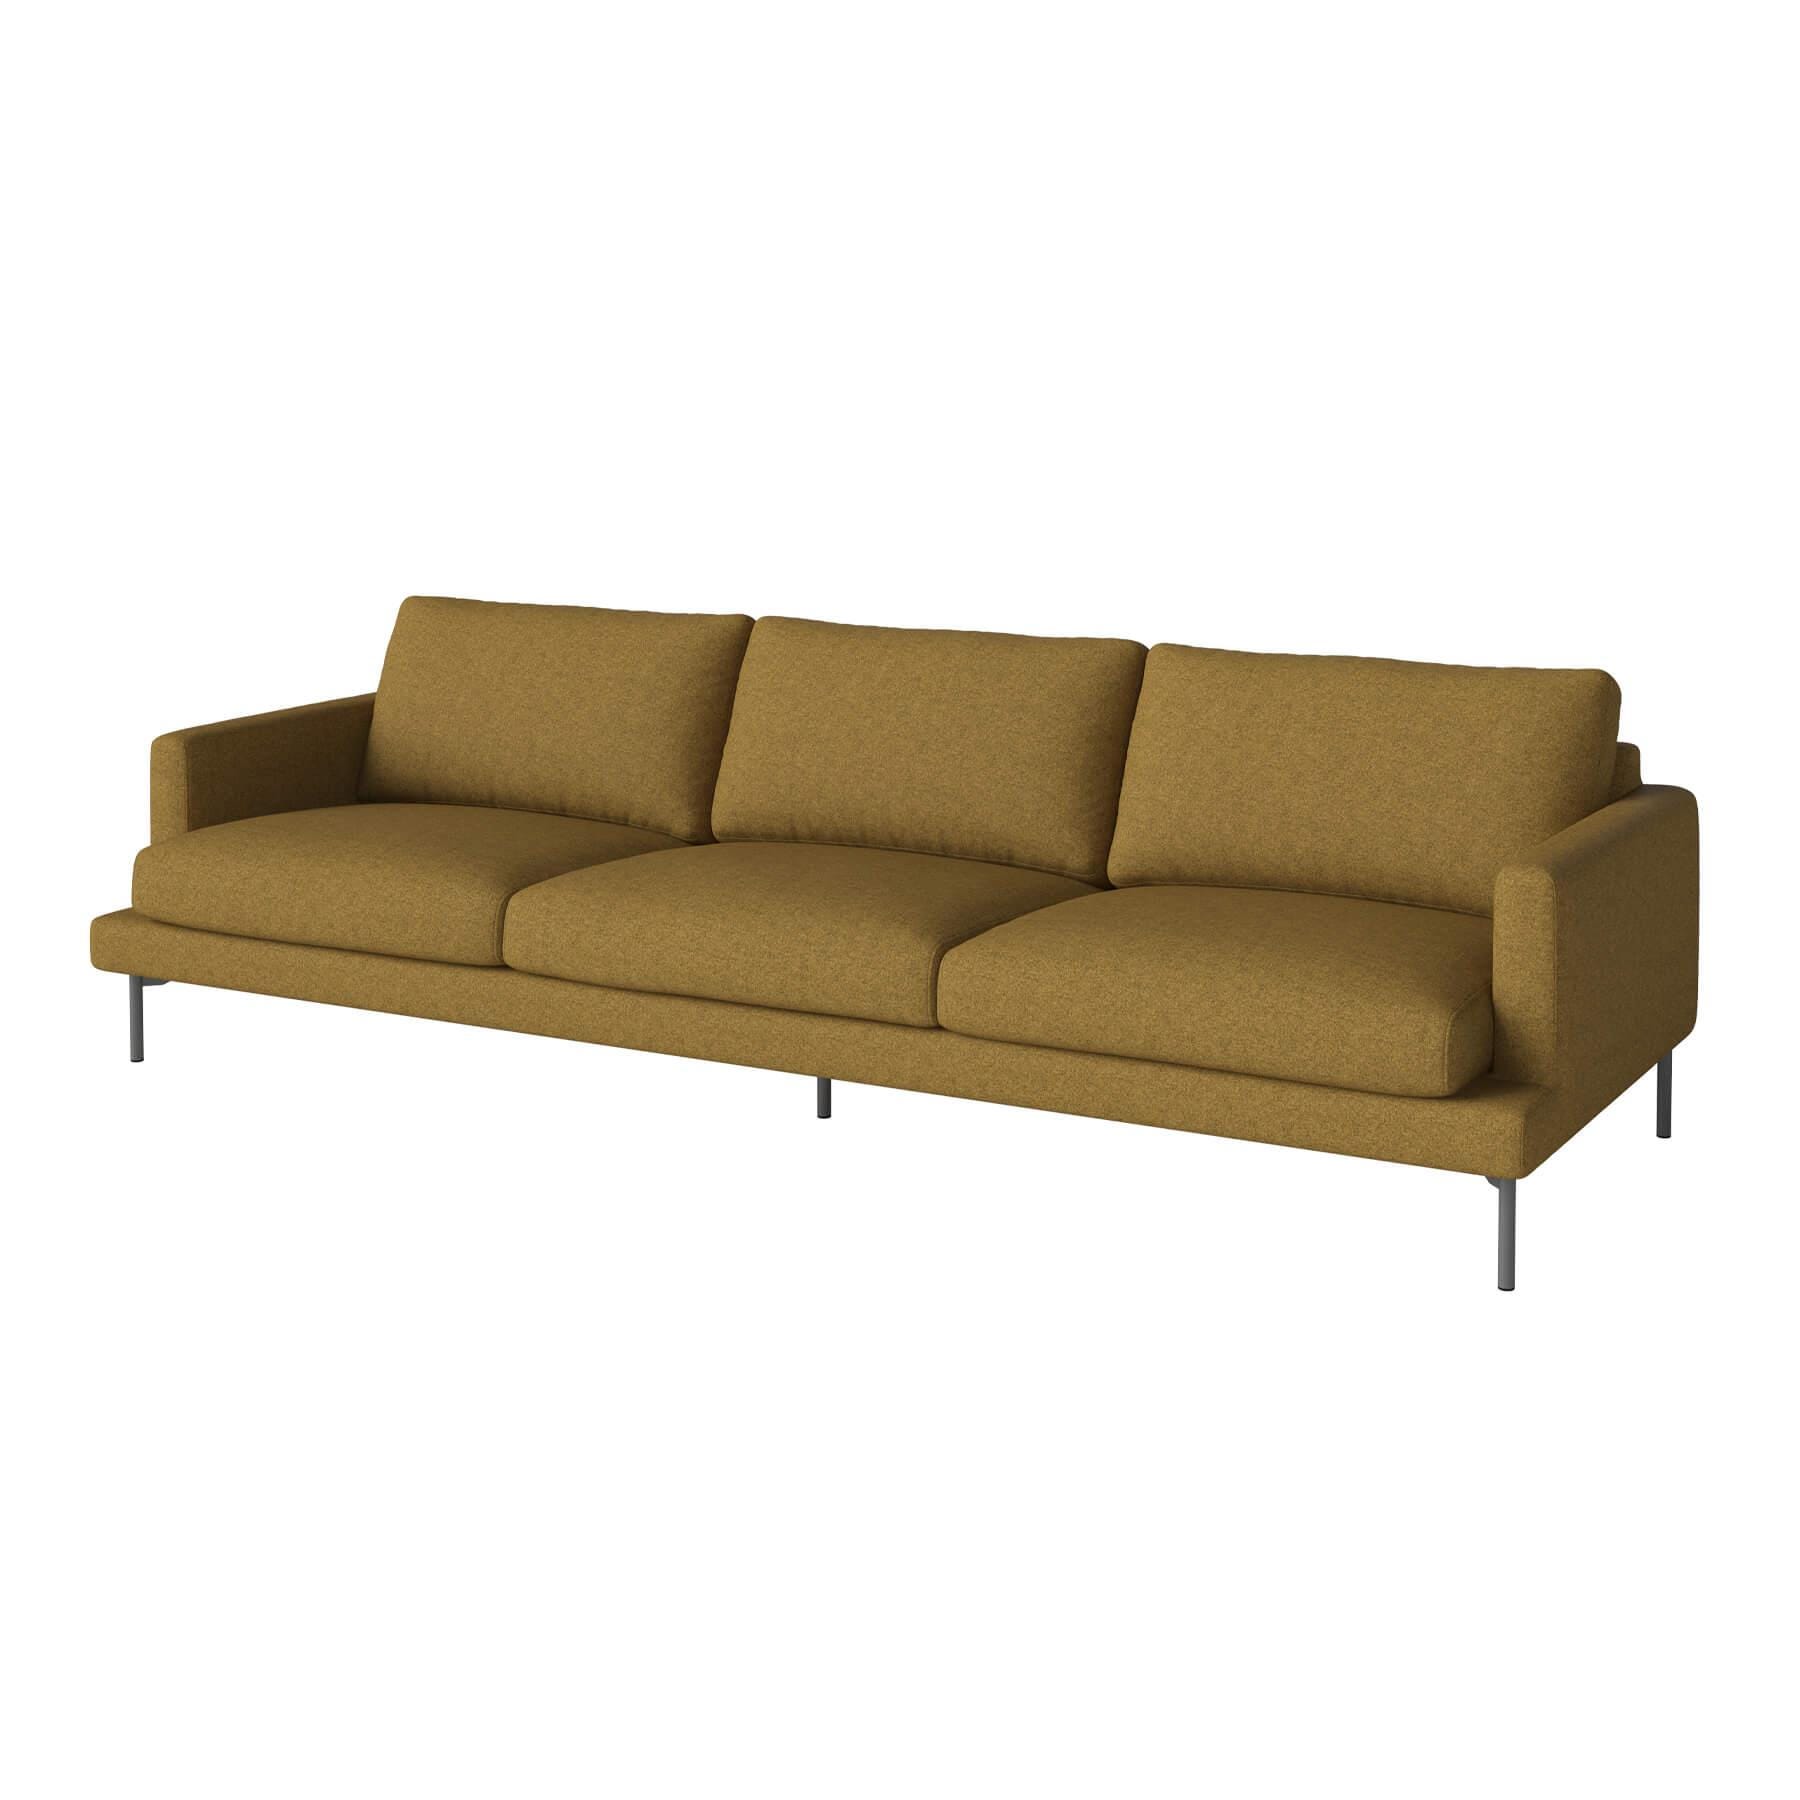 Bolia Veneda Sofa 4 Seater Sofa Grey Laquered Steel Qual Curry Brown Designer Furniture From Holloways Of Ludlow